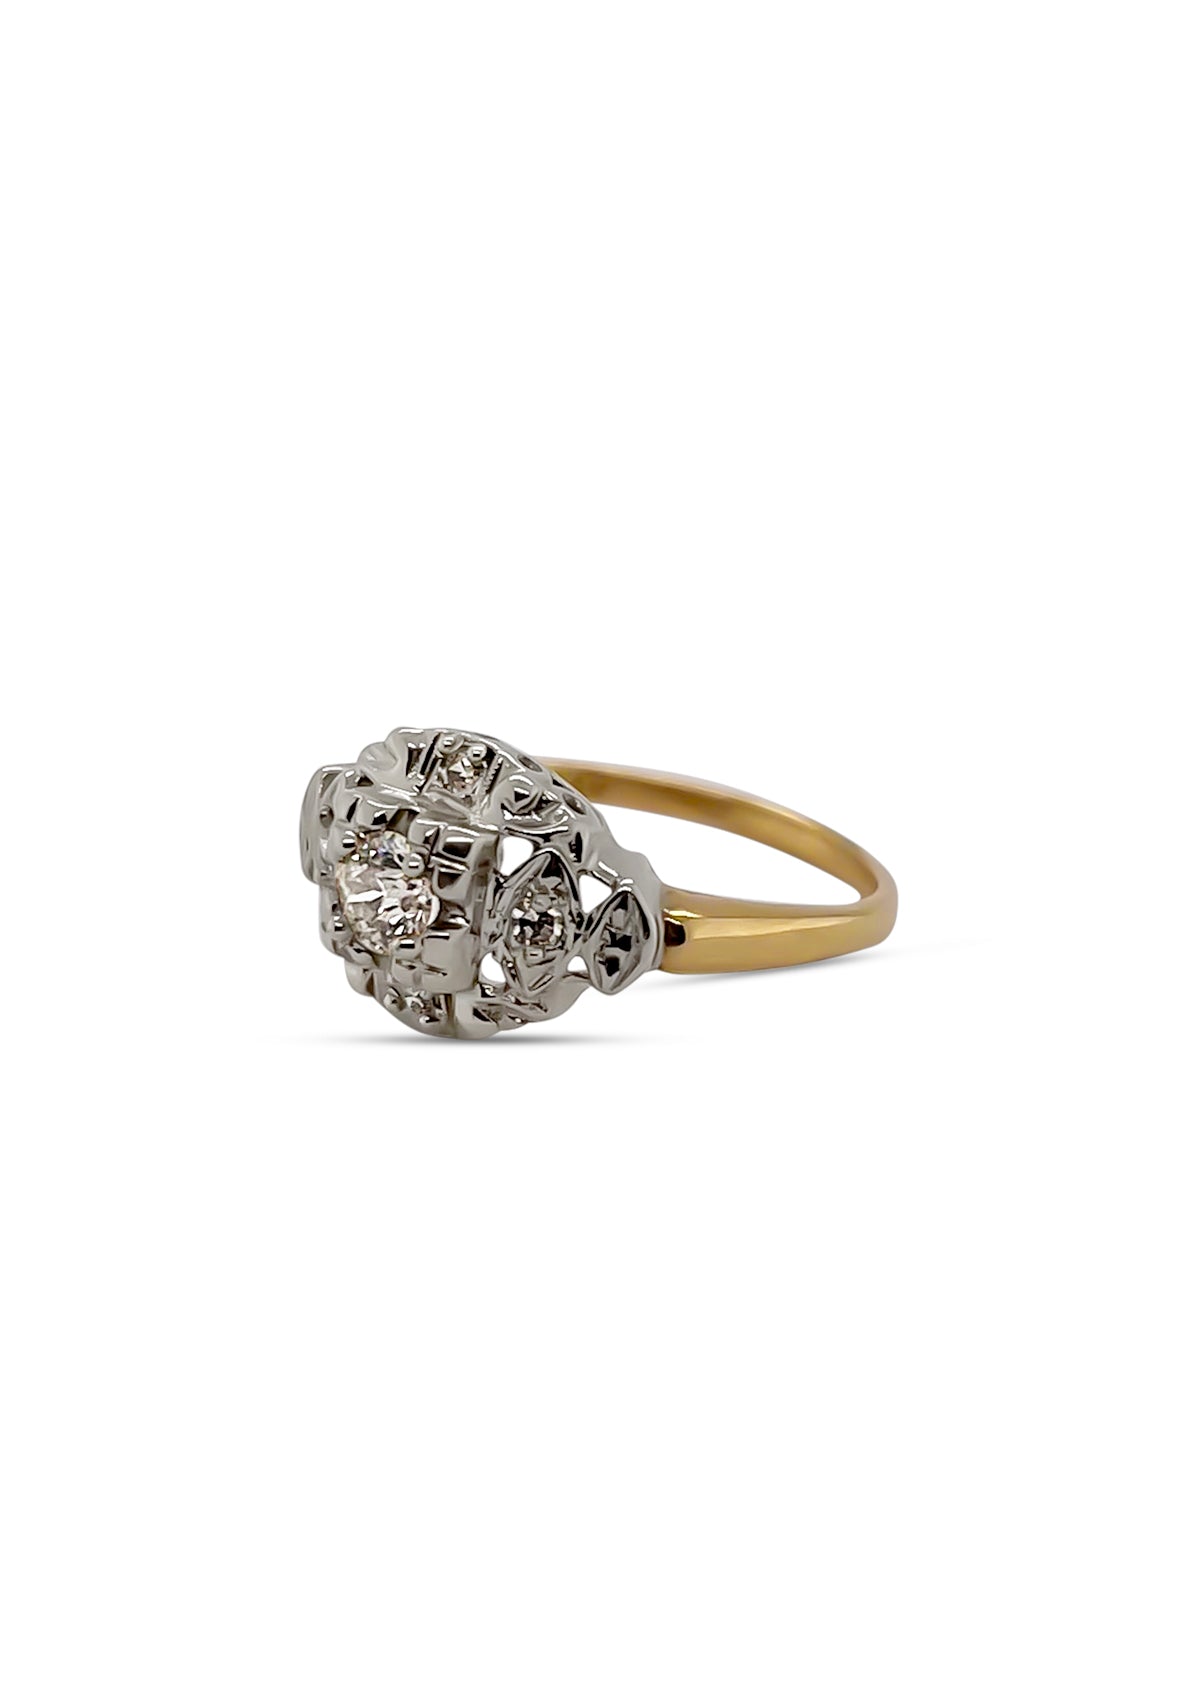 At Auction: 14KWG .25CT DIAMOND RING, SIZE 8.75